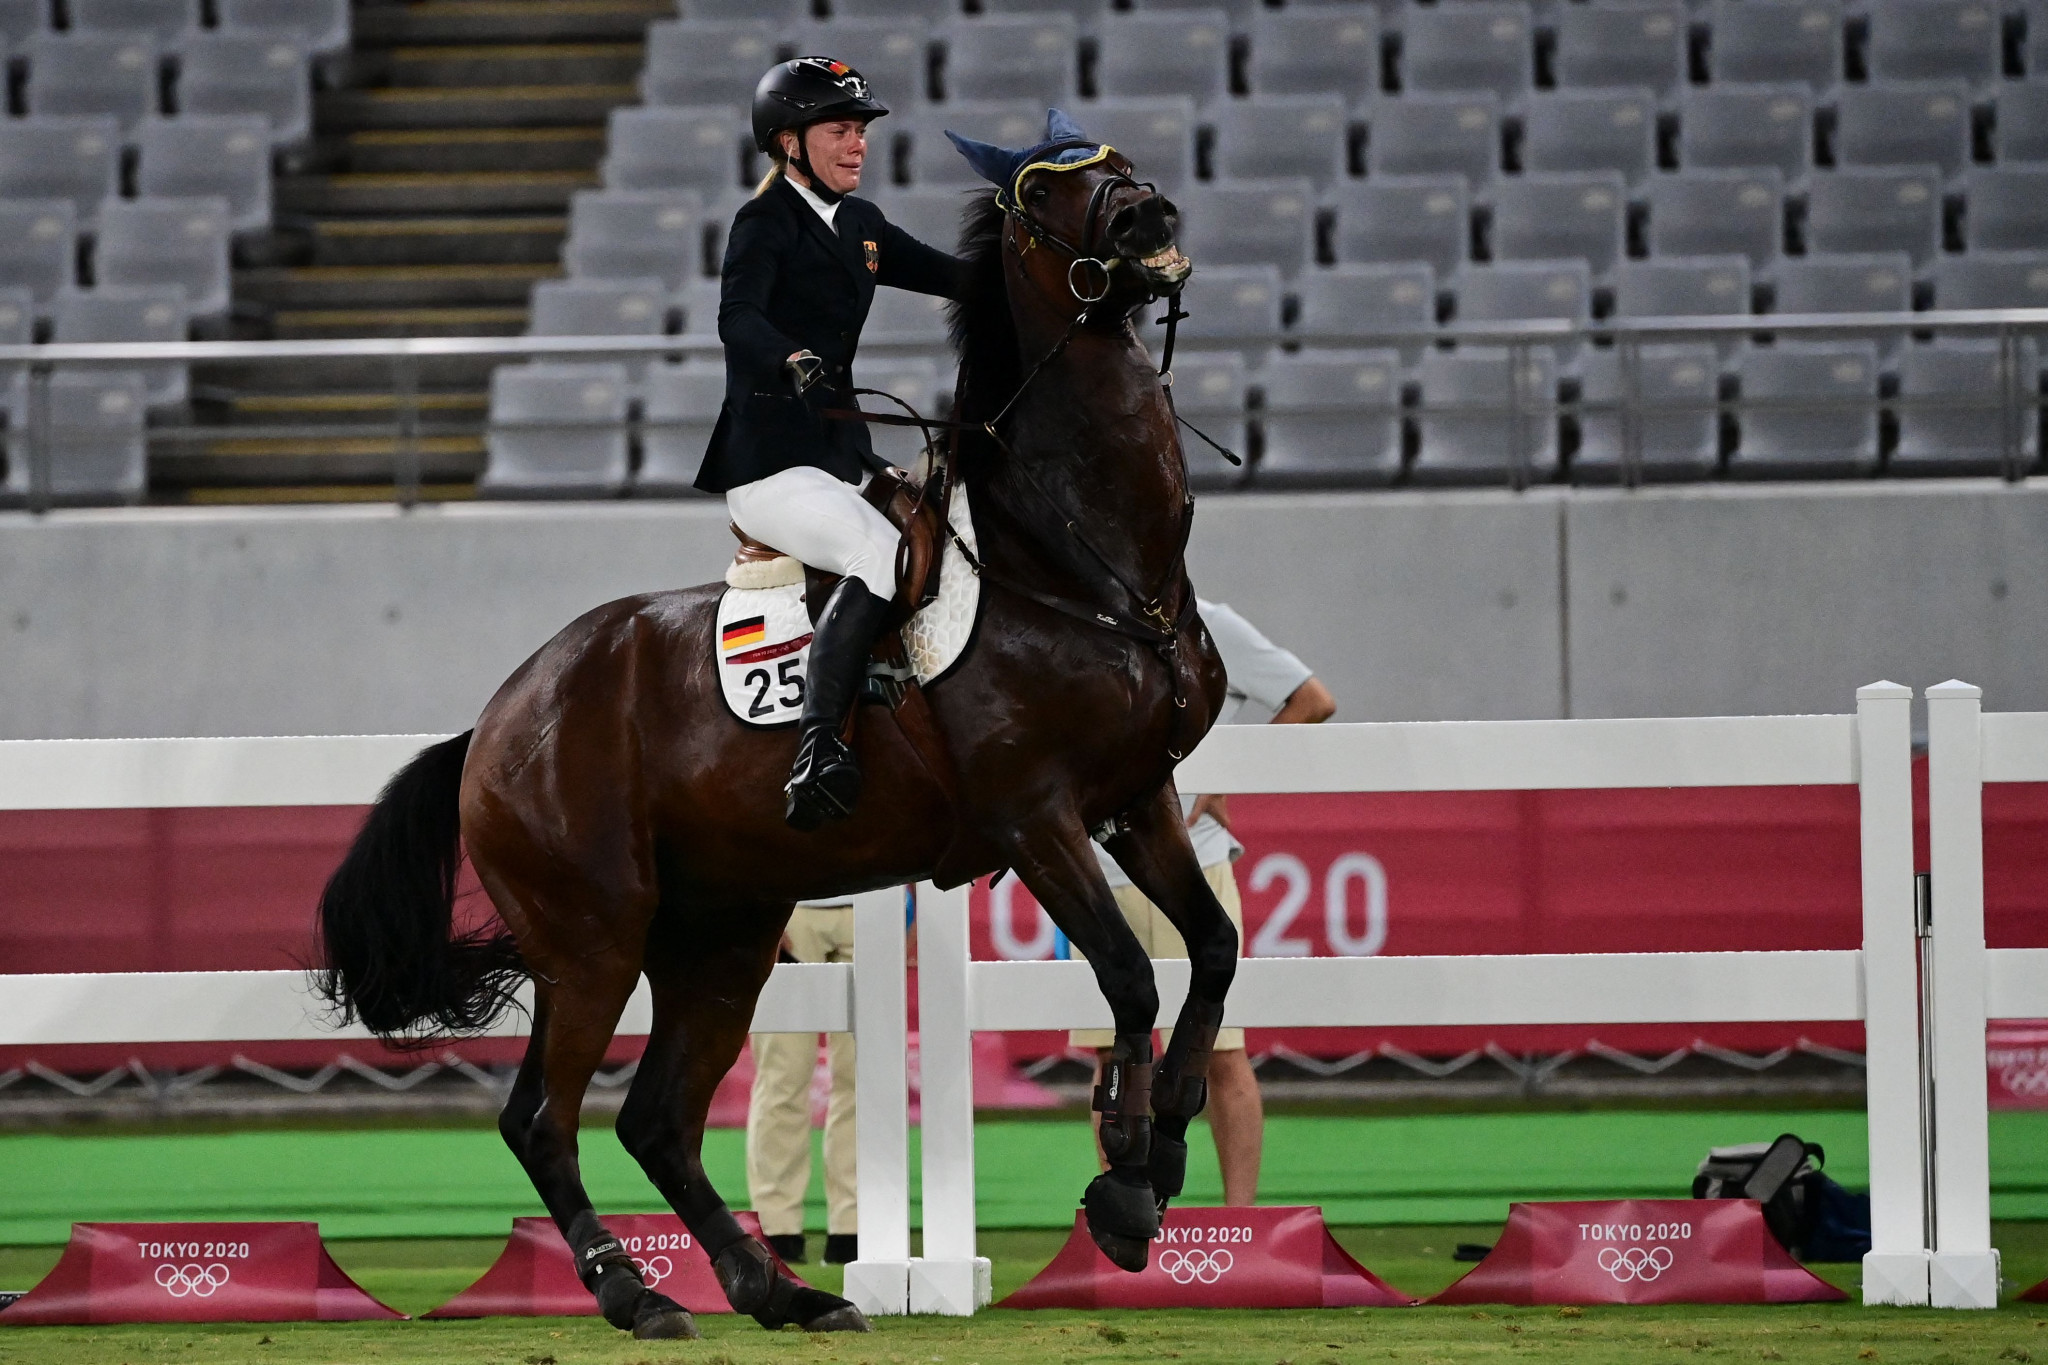 Horse welfare issues came under the spotlight at Tokyo 2020 following the scandal involving the horse Saint-Boy in the modern pentathlon competition ©Getty Images